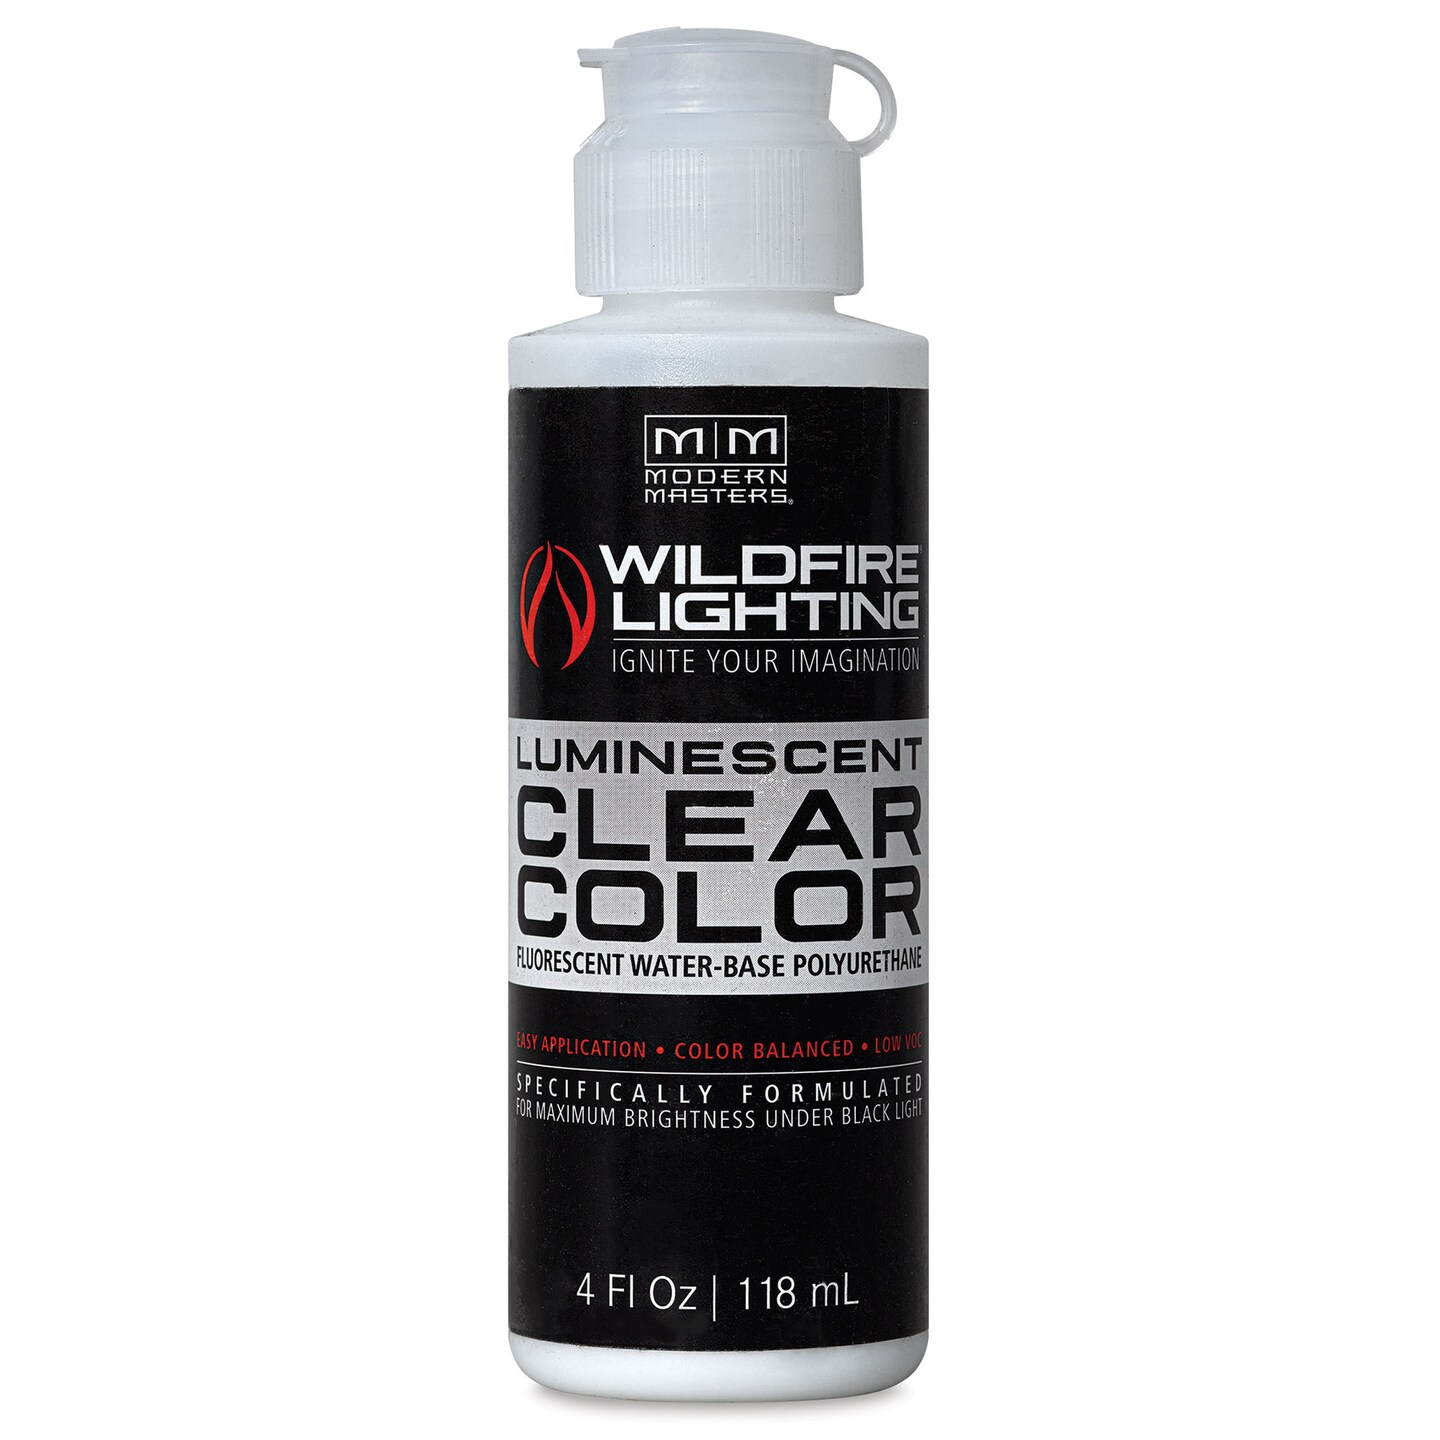 Wildfire Invisible Clear Color Luminescent Polyurethane Paint - Pink, Flat, 4 oz Bottle